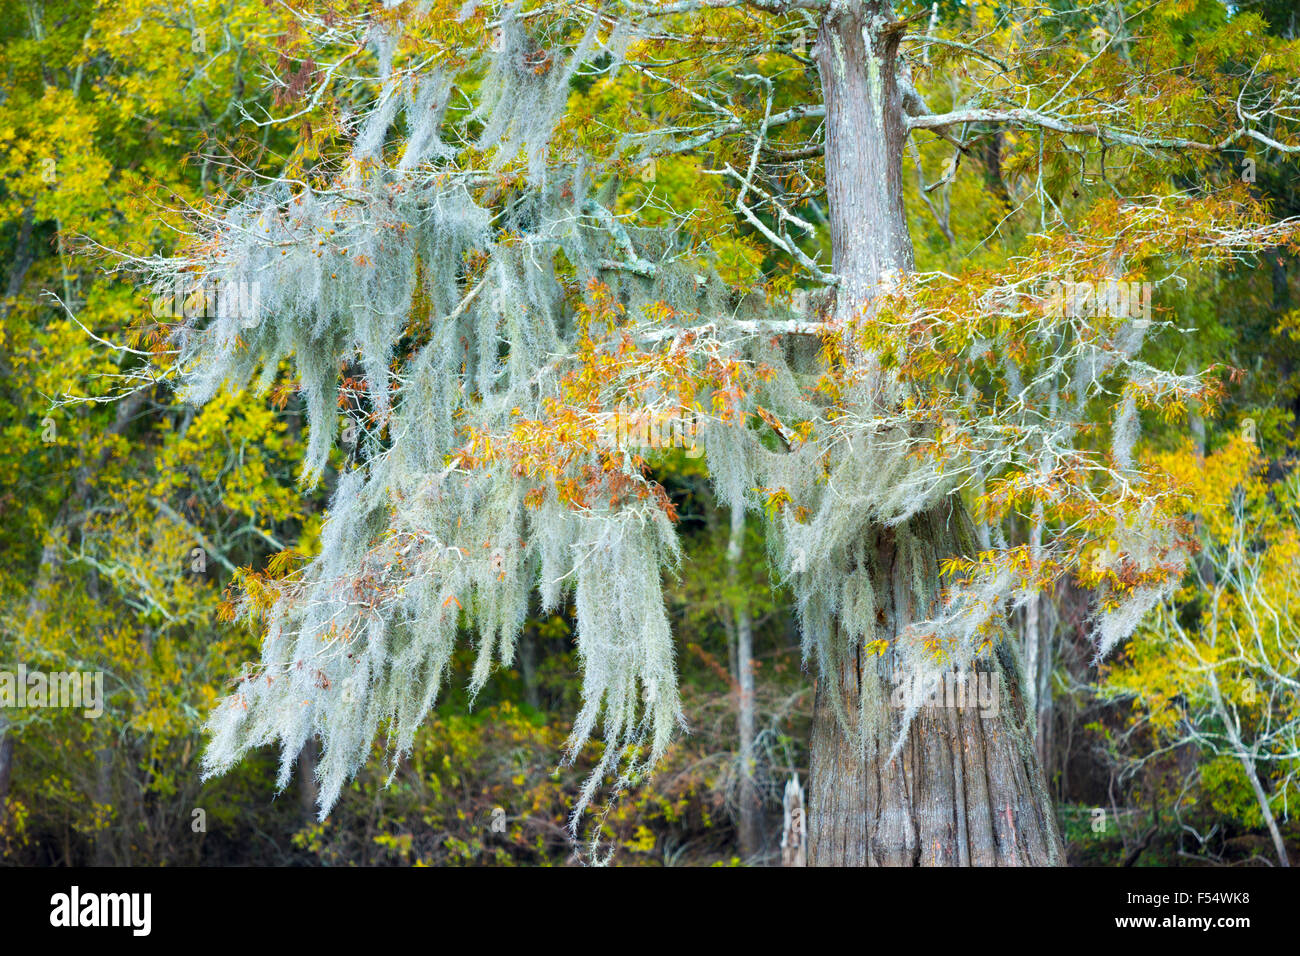 Bald cypress tree deciduous conifer, covered with Spanish Moss, in Atchafalaya Swamp, Louisiana USA Stock Photo